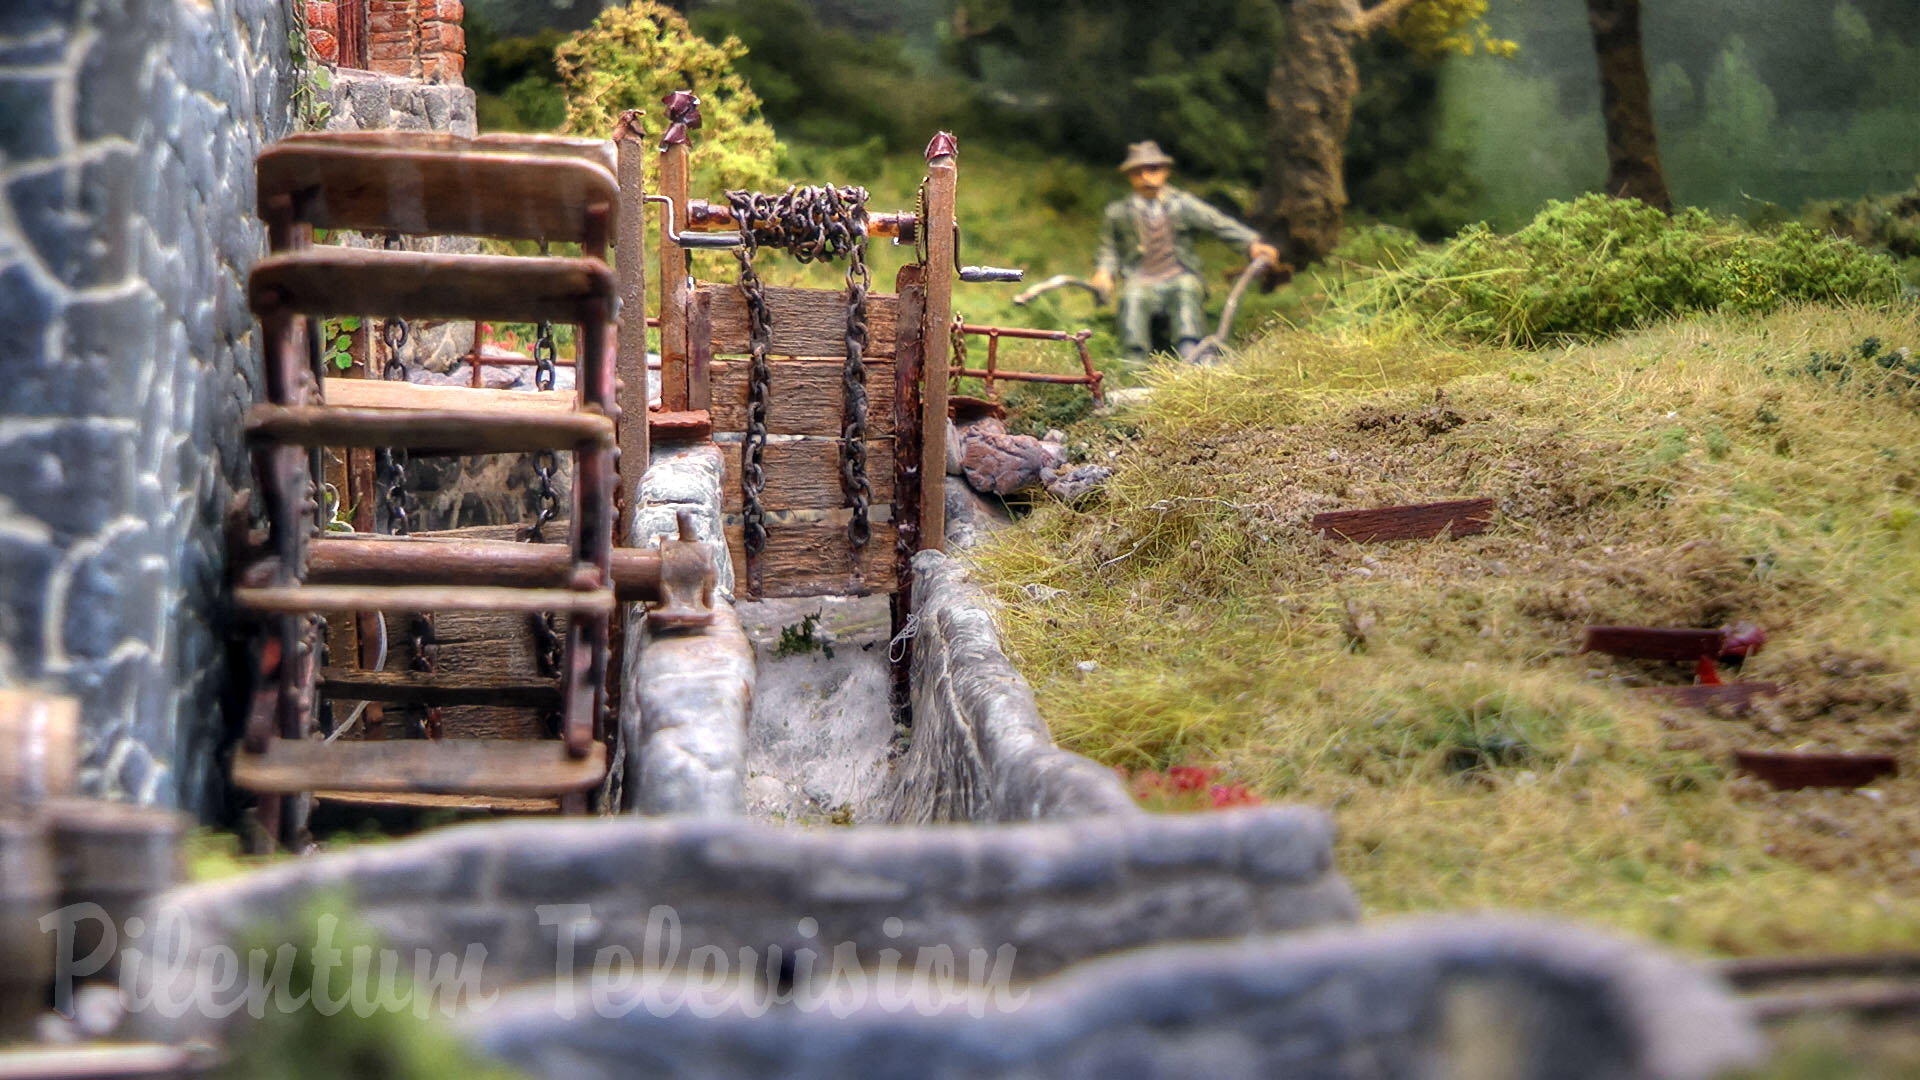 One of the Most Detailed Model Railway Layouts in Narrow Gauge O Scale - Old England by Samuel de Zutter